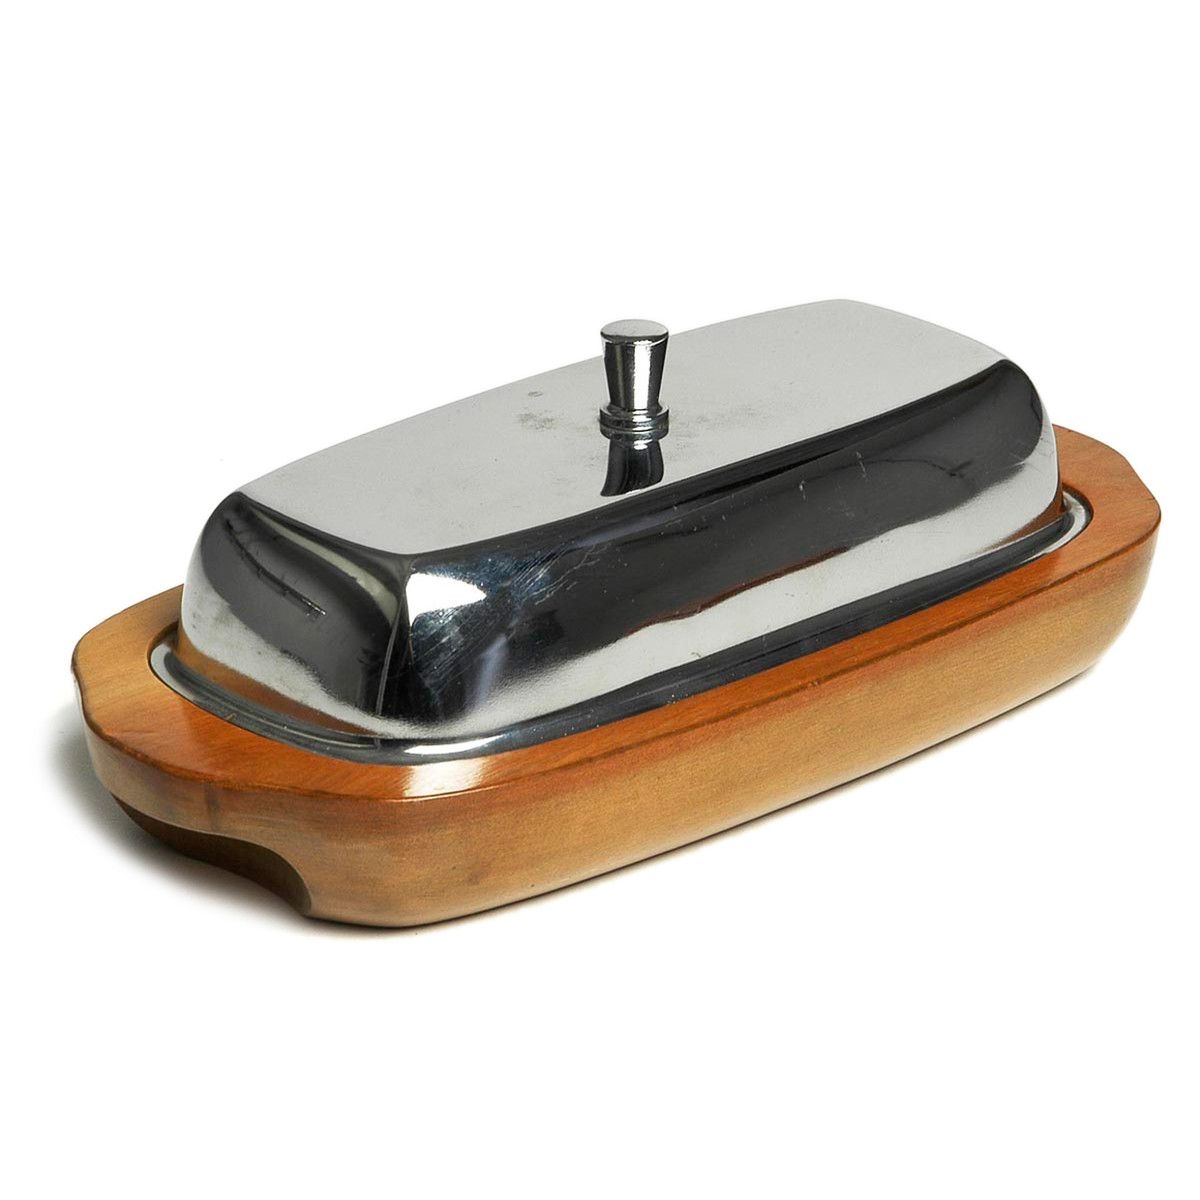 Contemporary butter dish